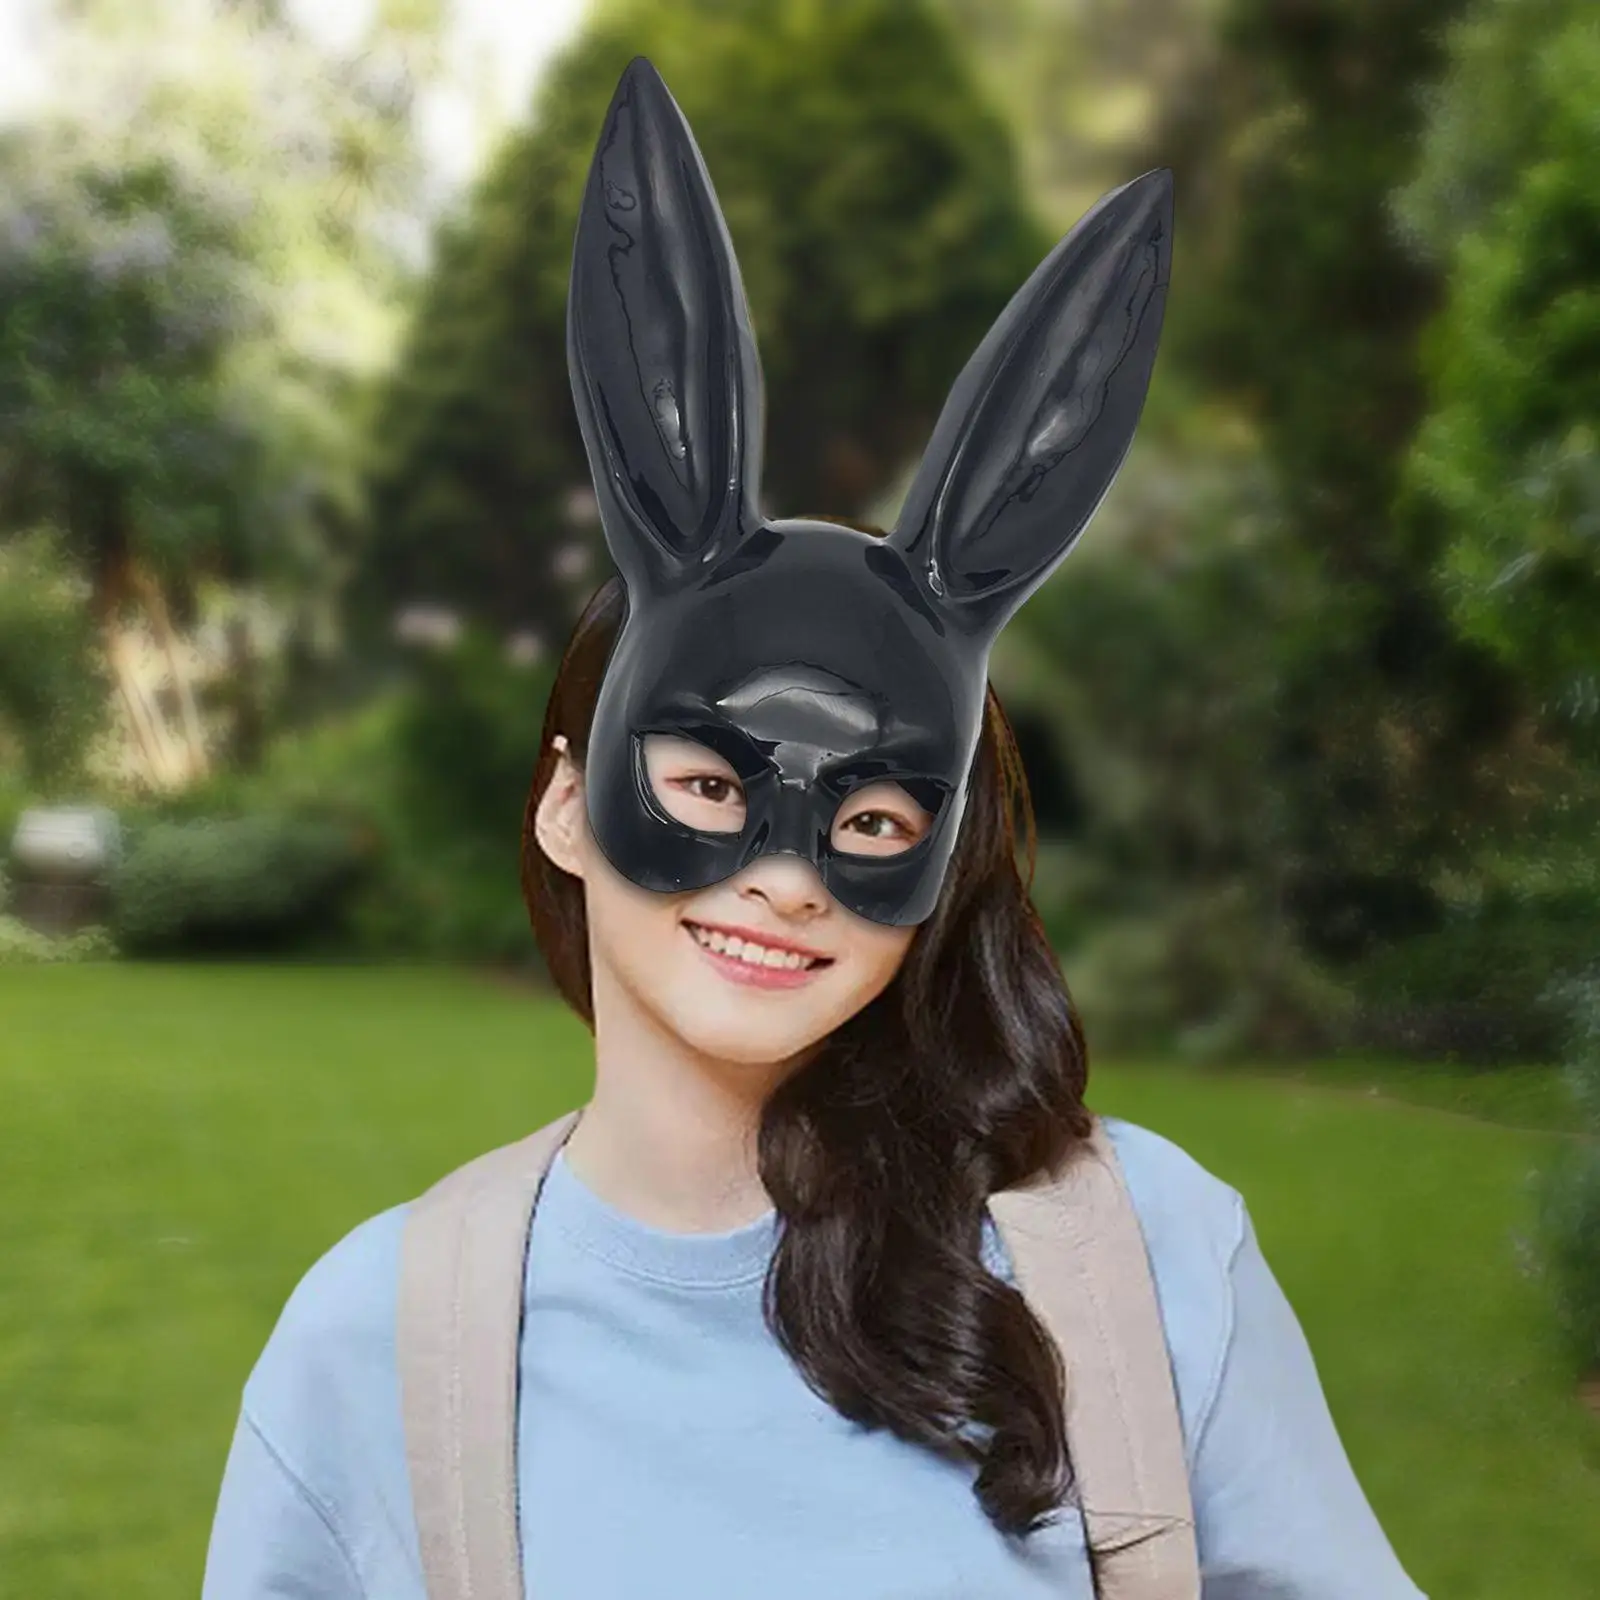 Women`s Masquerade Rabbit Mask  Photo Prop  Bunny Mask for Theatrical Halloween Eve Accessory Holiday Cosplay